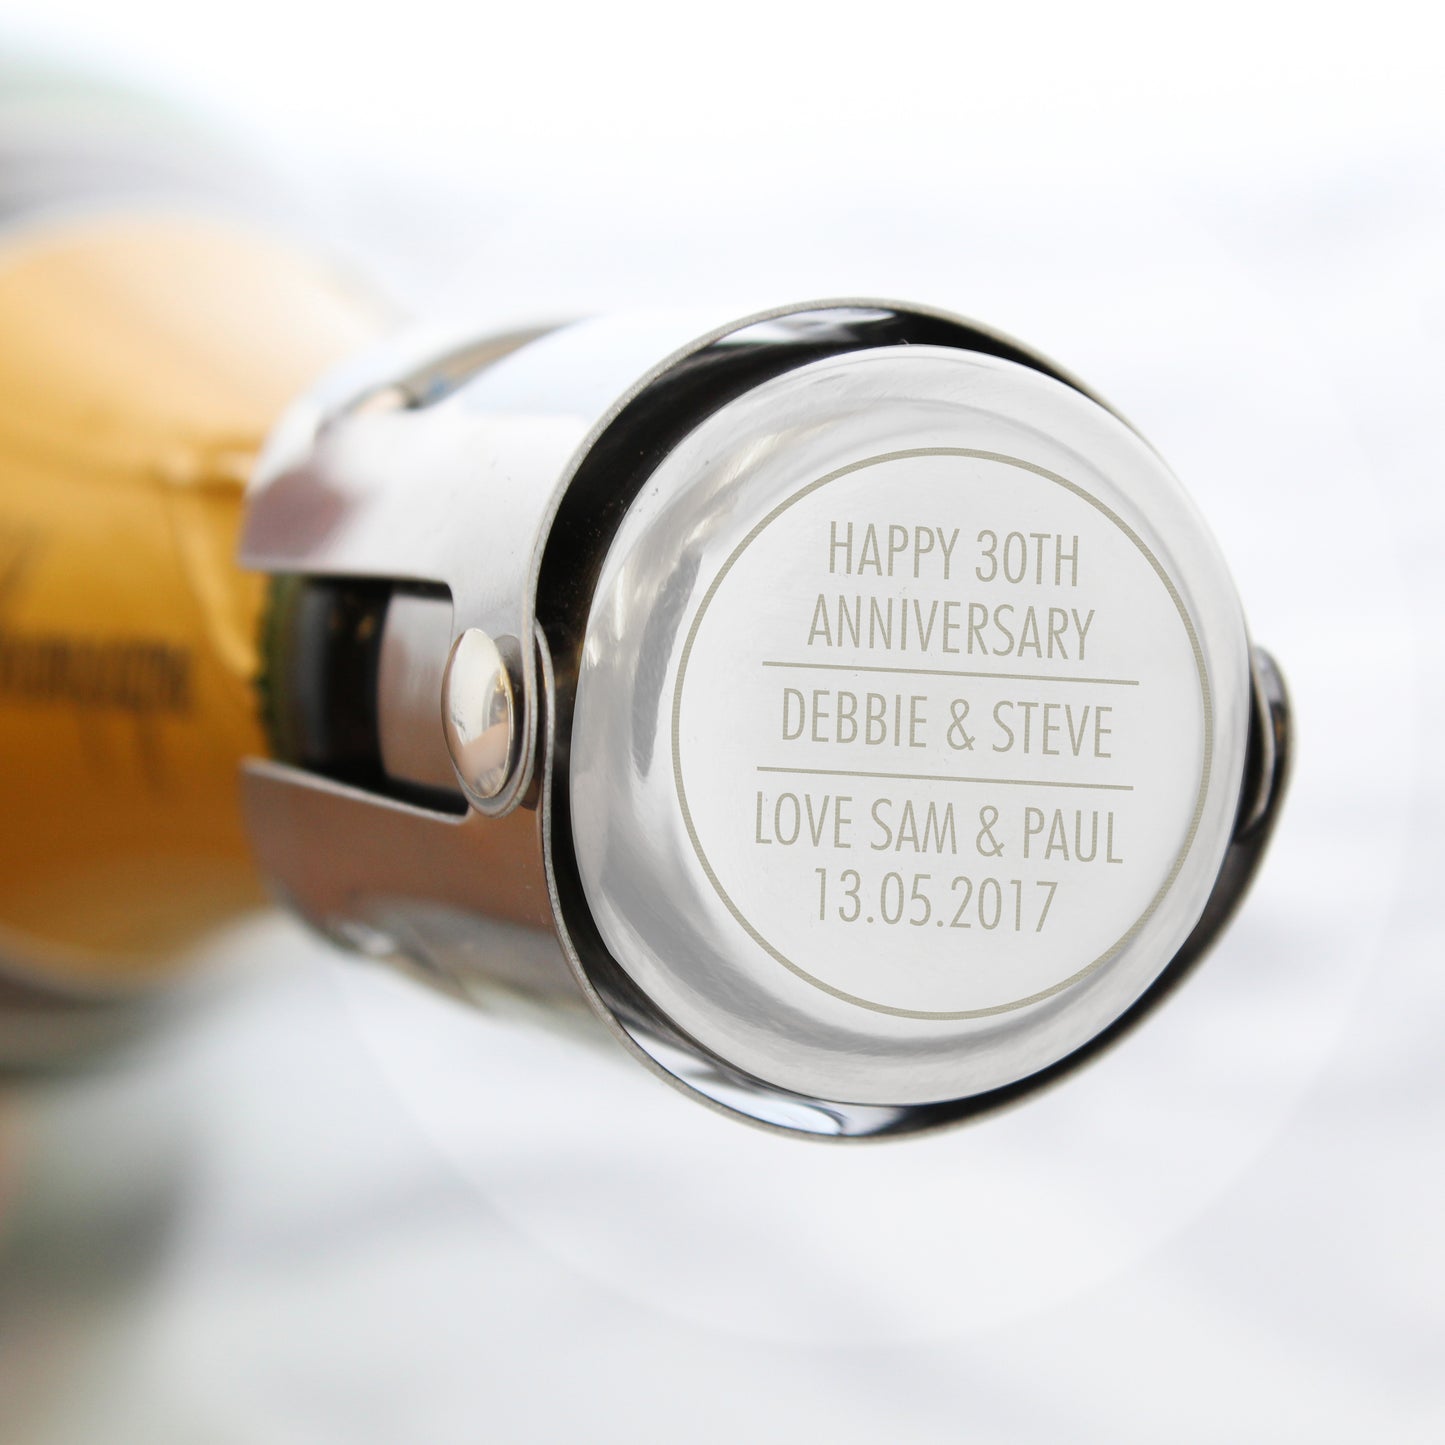 Personalised Classic Bottle Stopper - Personalise It!